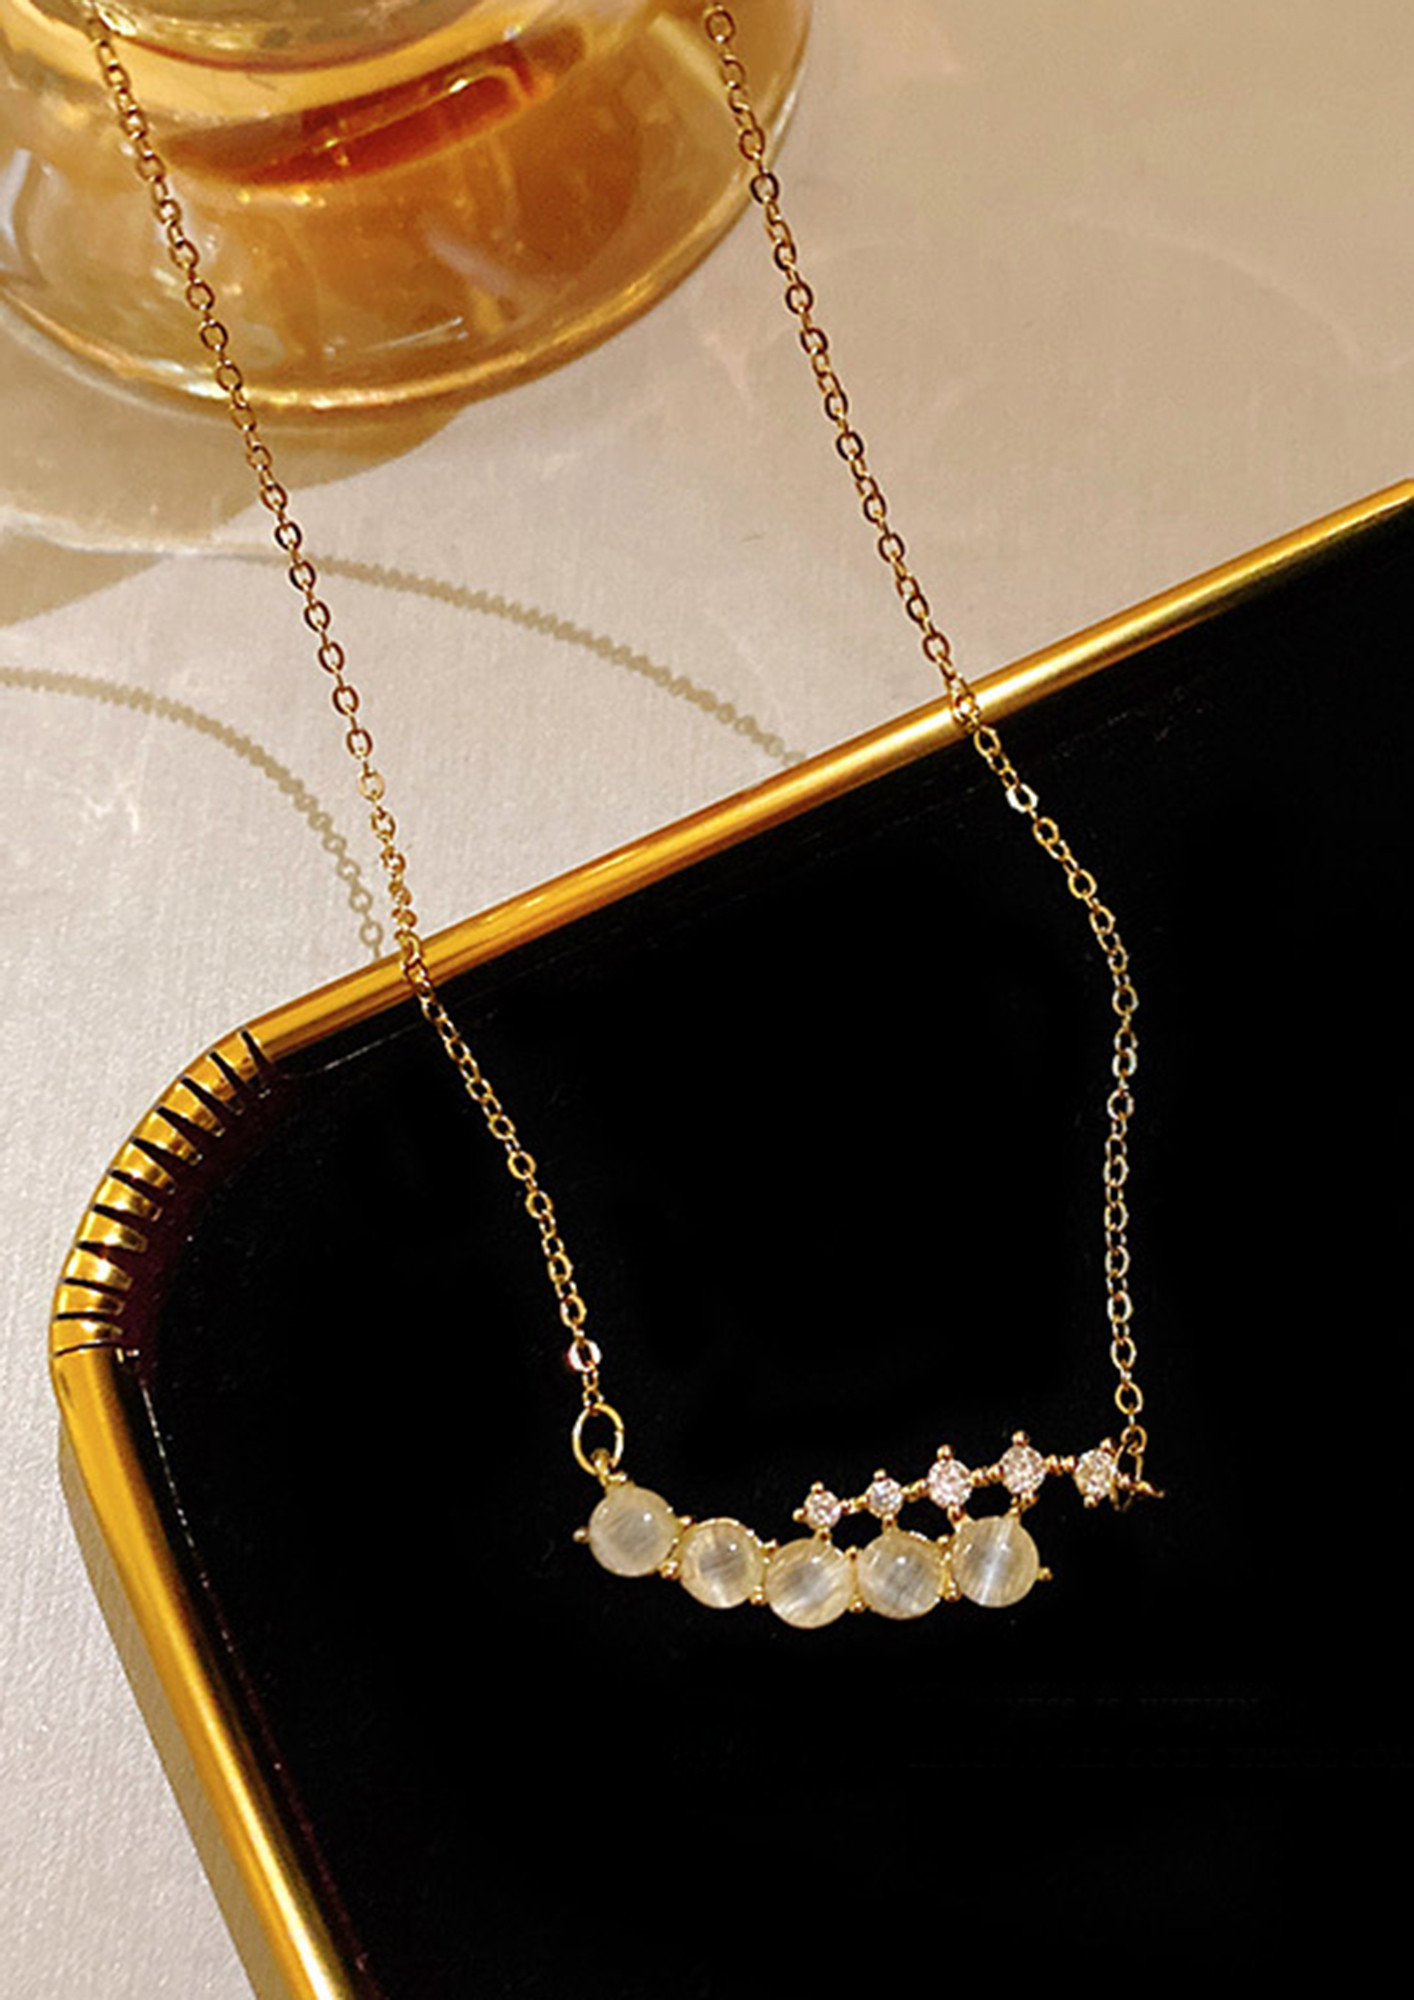 RHINESTONES AND PEARLY DETAILED GOLDEN NECKLACE